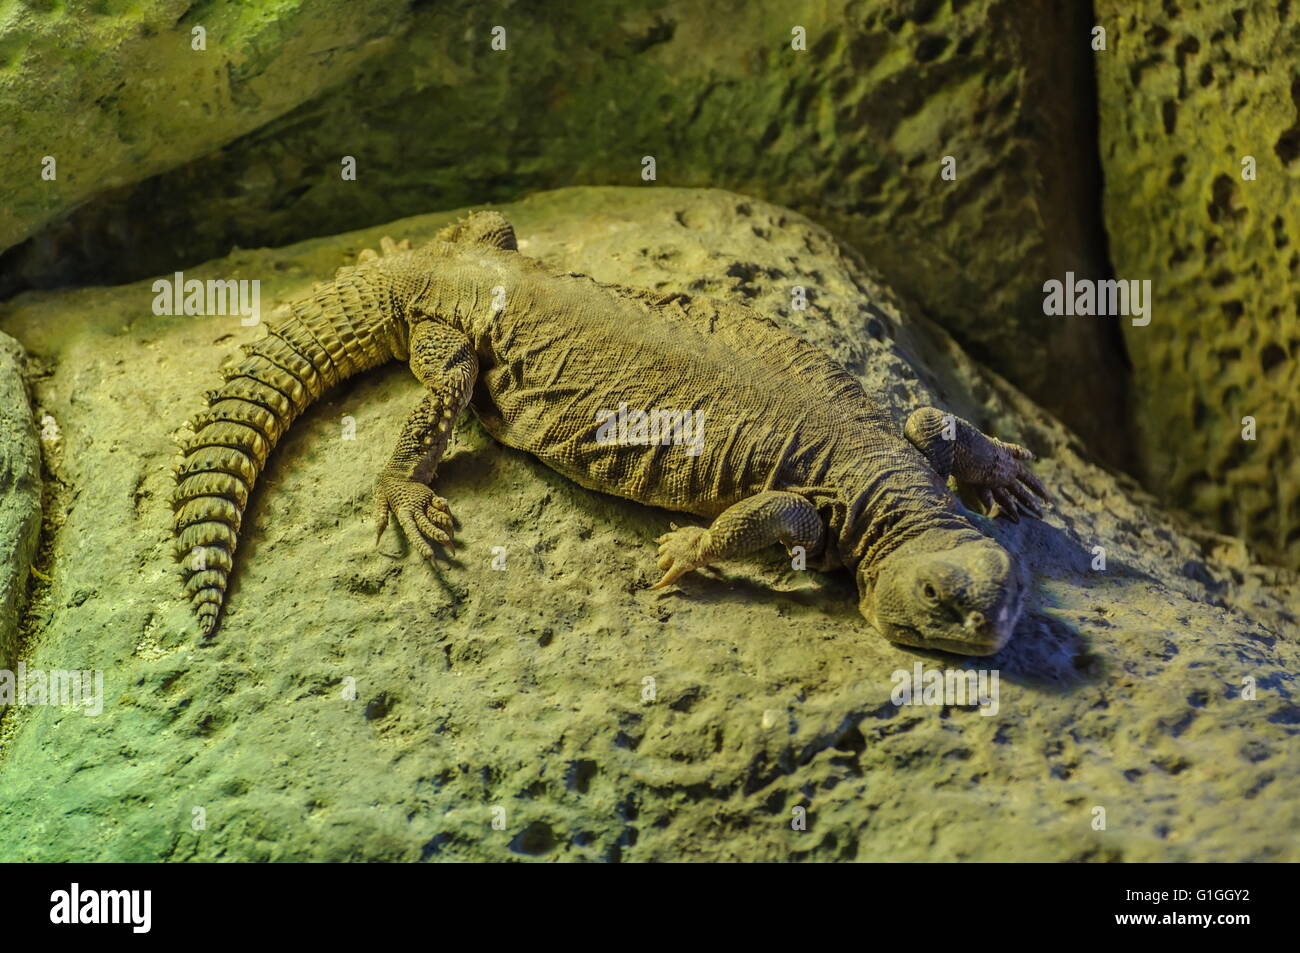 A large girdled lizard with a flattened body in Loro Parque, Tenerife, Canary Islands. Stock Photo